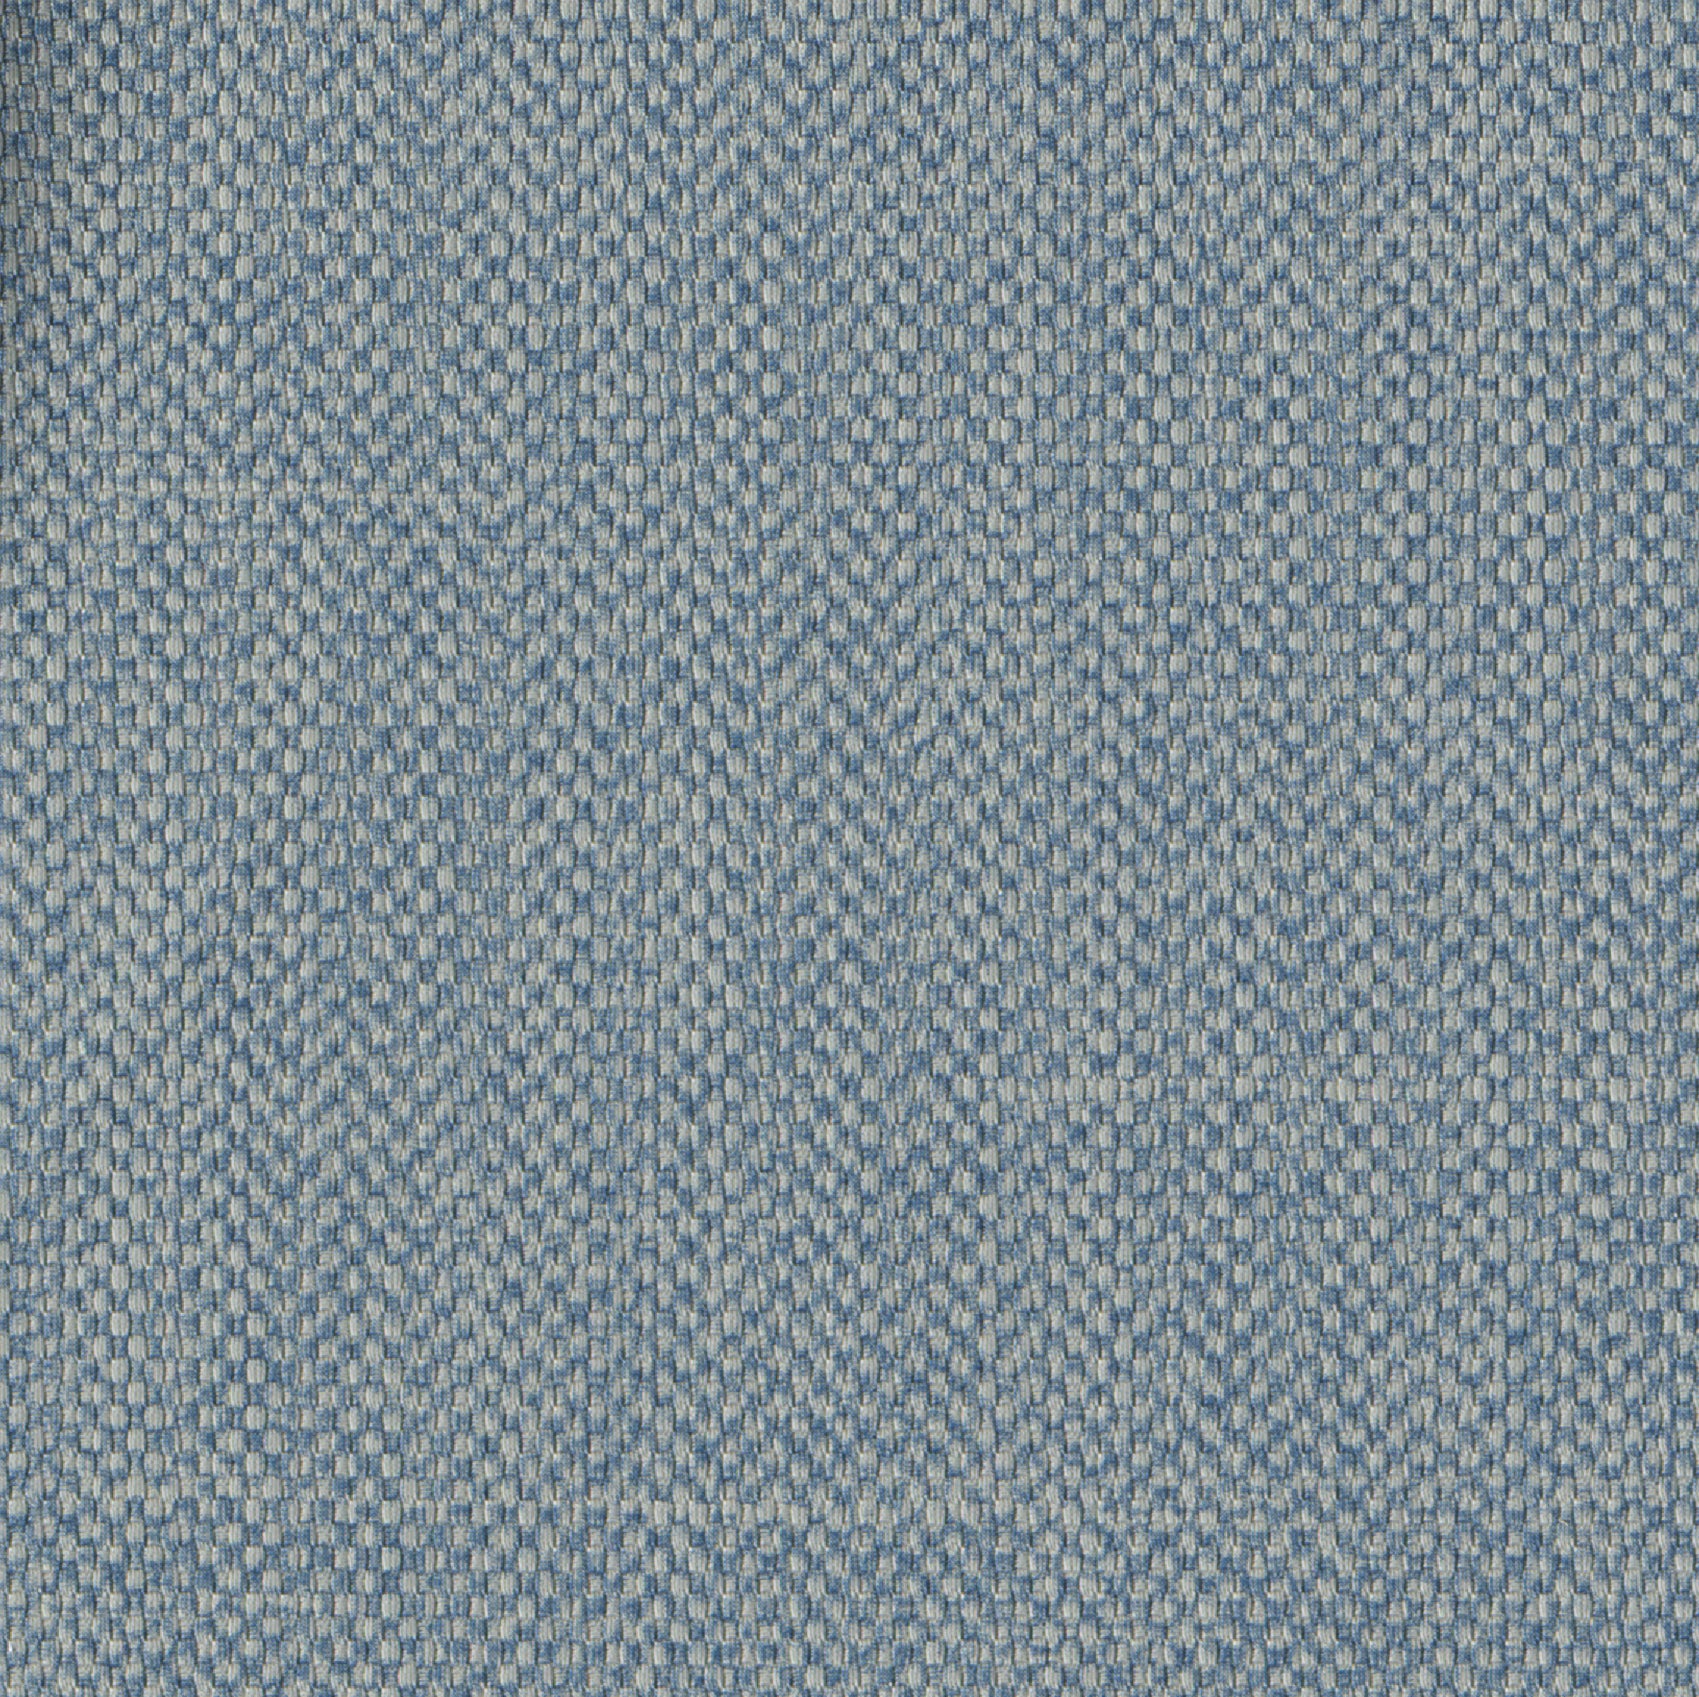    Andriali-Contract-Vinyl_Upholstery-Design-OasisFR-5-Color-507SkyBlue-Width-140cm